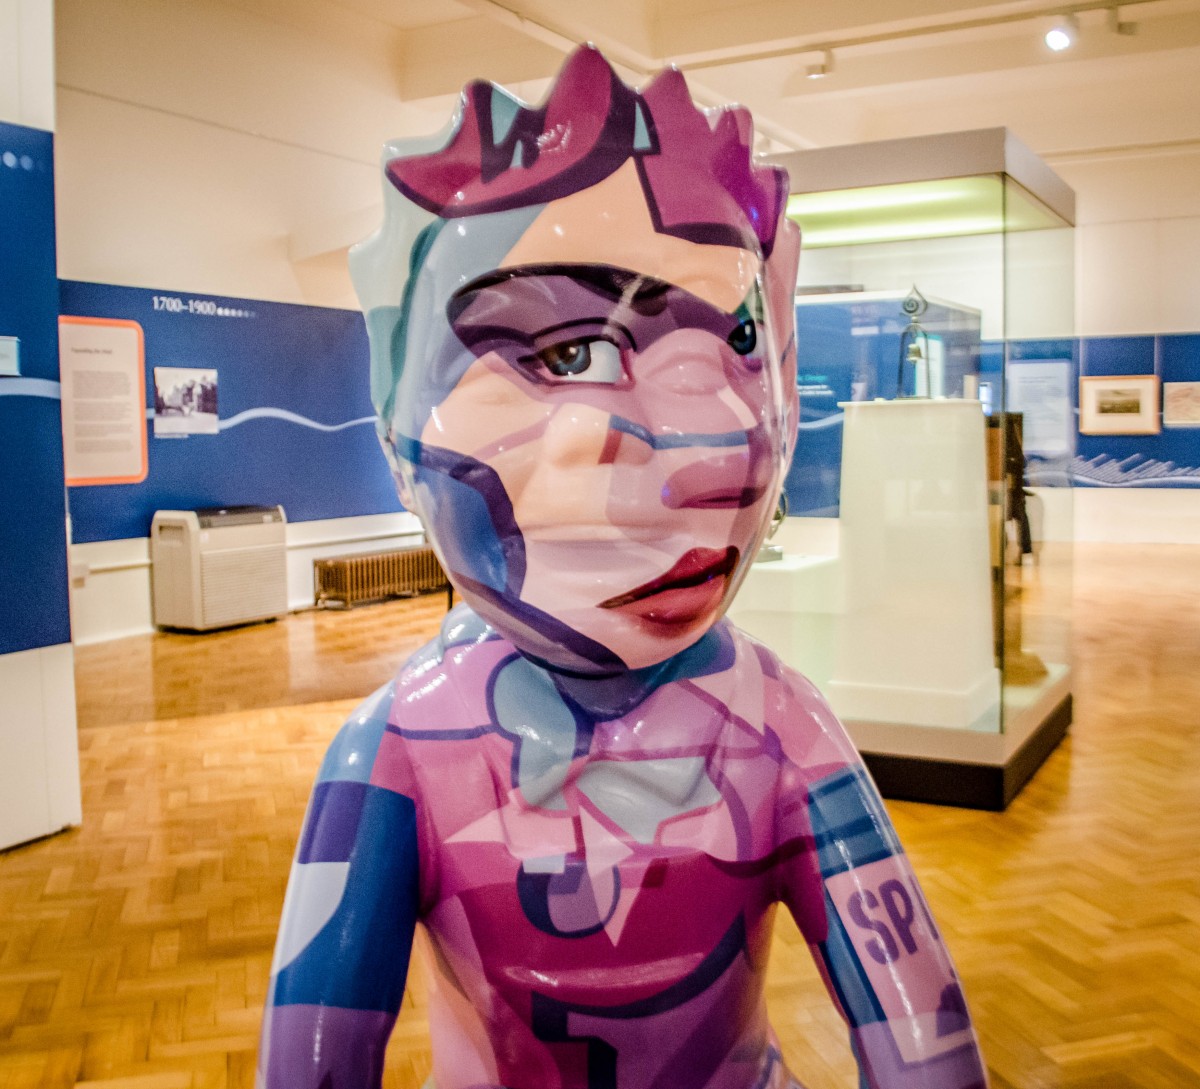 This pink Oor Wullie with a hidden face in it is aptly called Wheres Wullie and was created and designed by Stuart McAlpine Miller.  Stuart  took inspiration from a number of sources. This Oor Wullie can be seen at Perth Musuem & Art Gallery